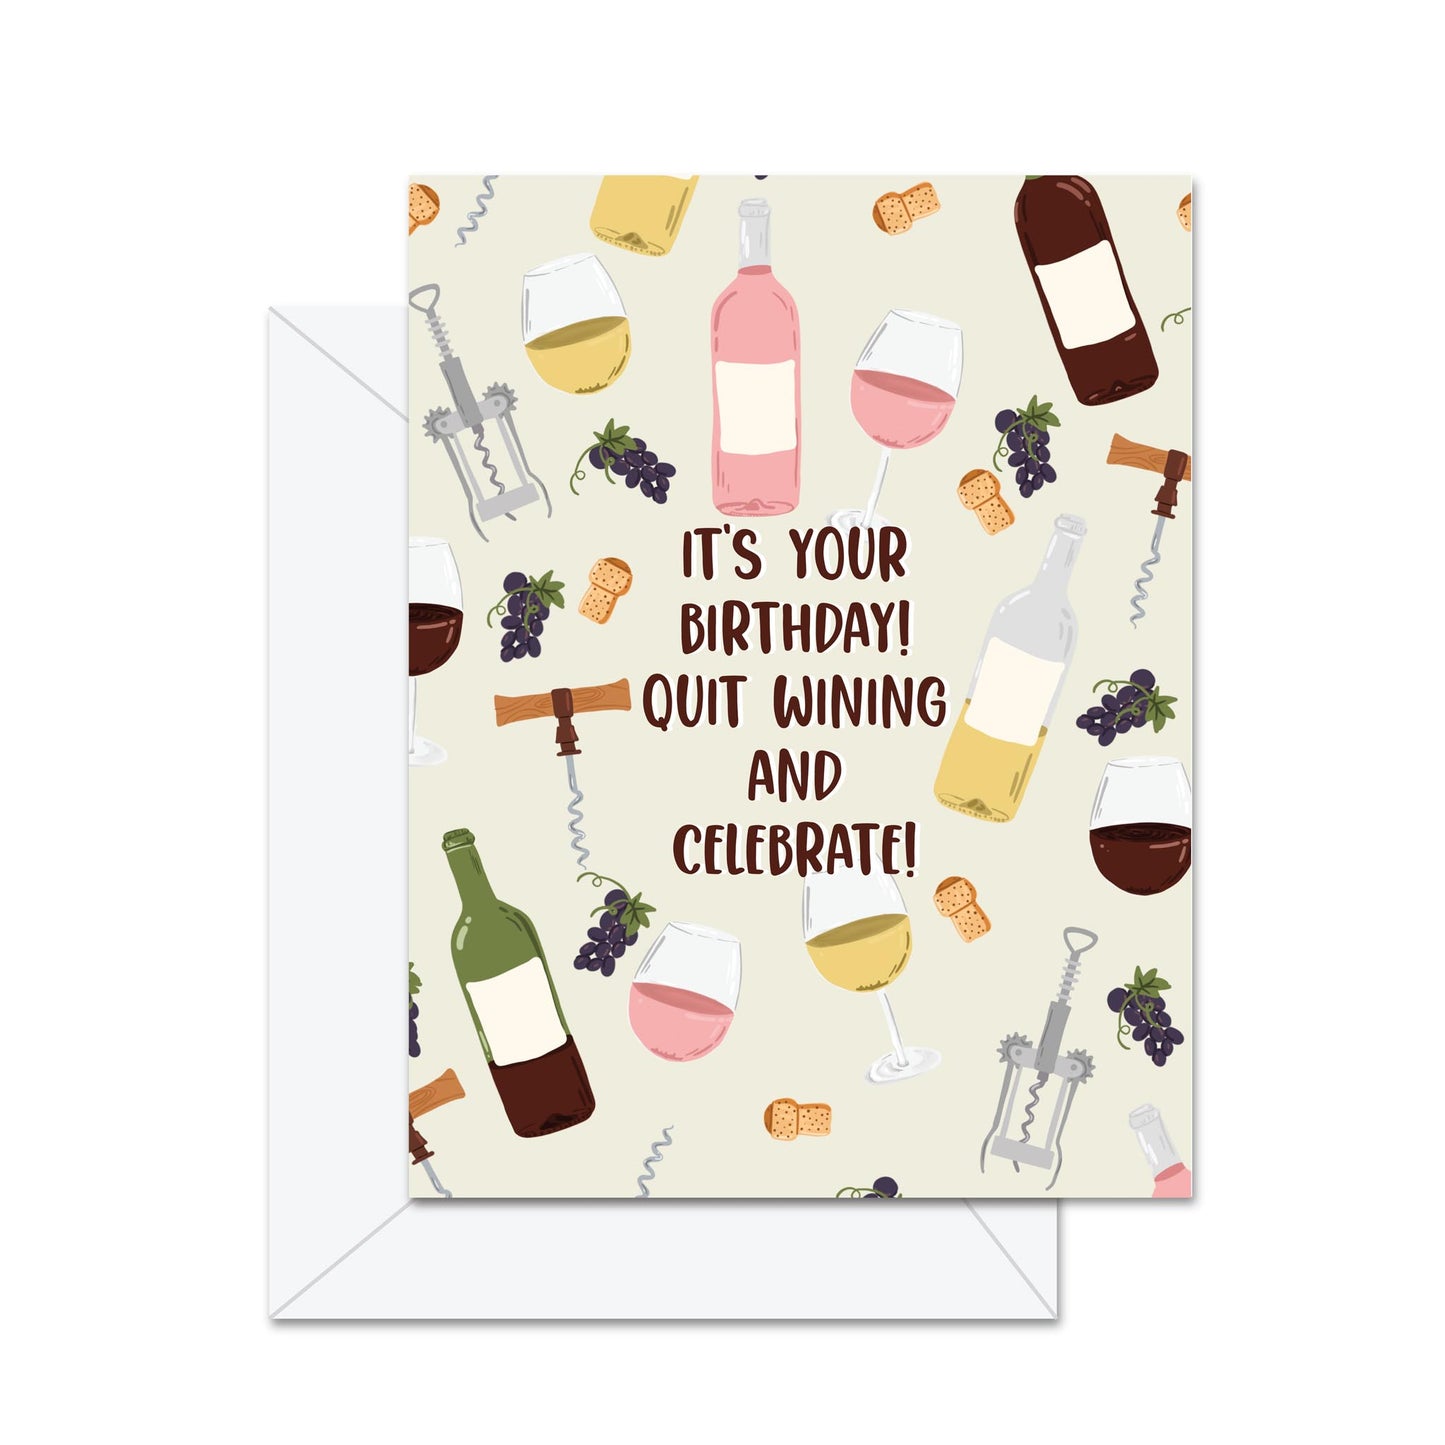 It's Your Birthday! Quit Wining And Celebrate!- Greeting Card